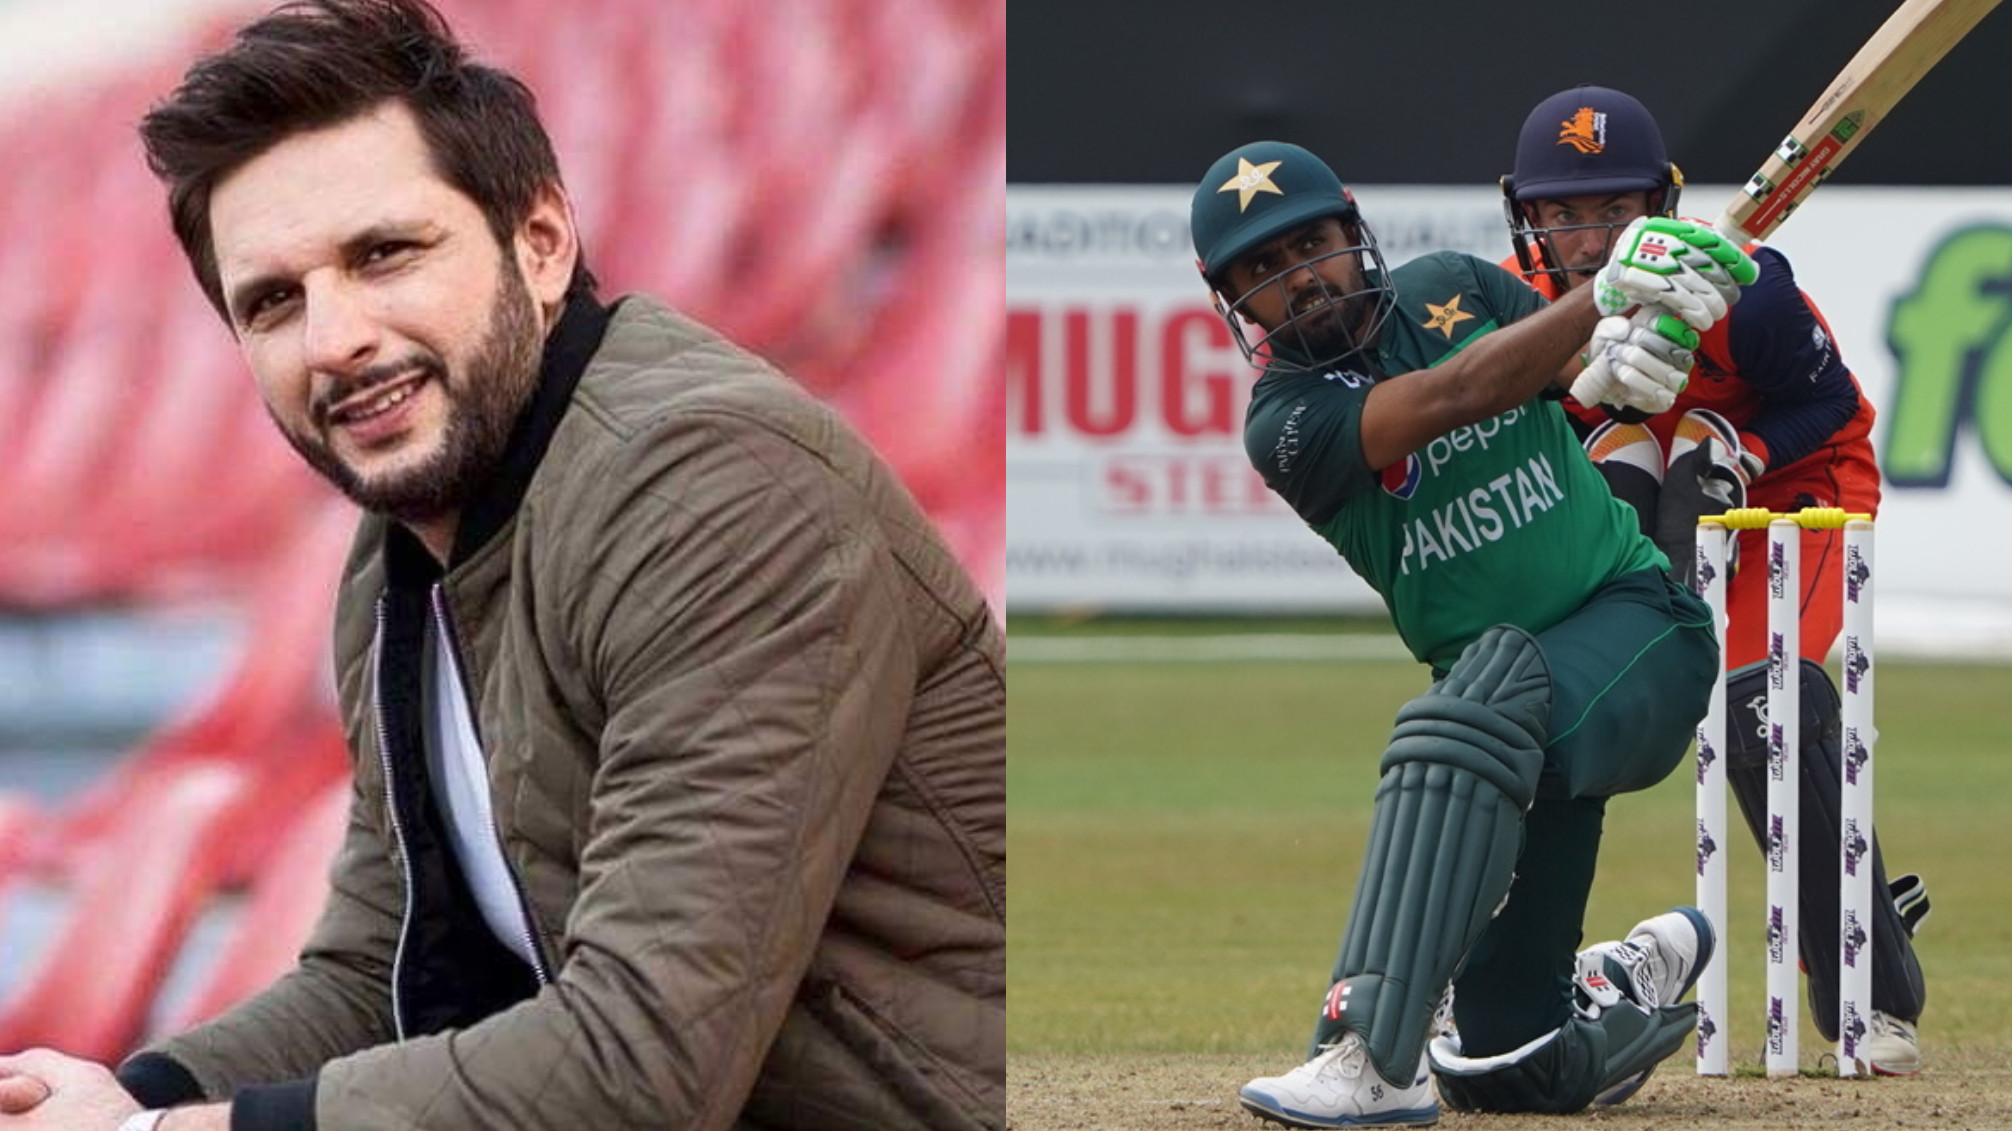 NED v PAK 2022: Shahid Afridi reveals what Babar Azam should do after being criticized for his dismissal against Netherlands